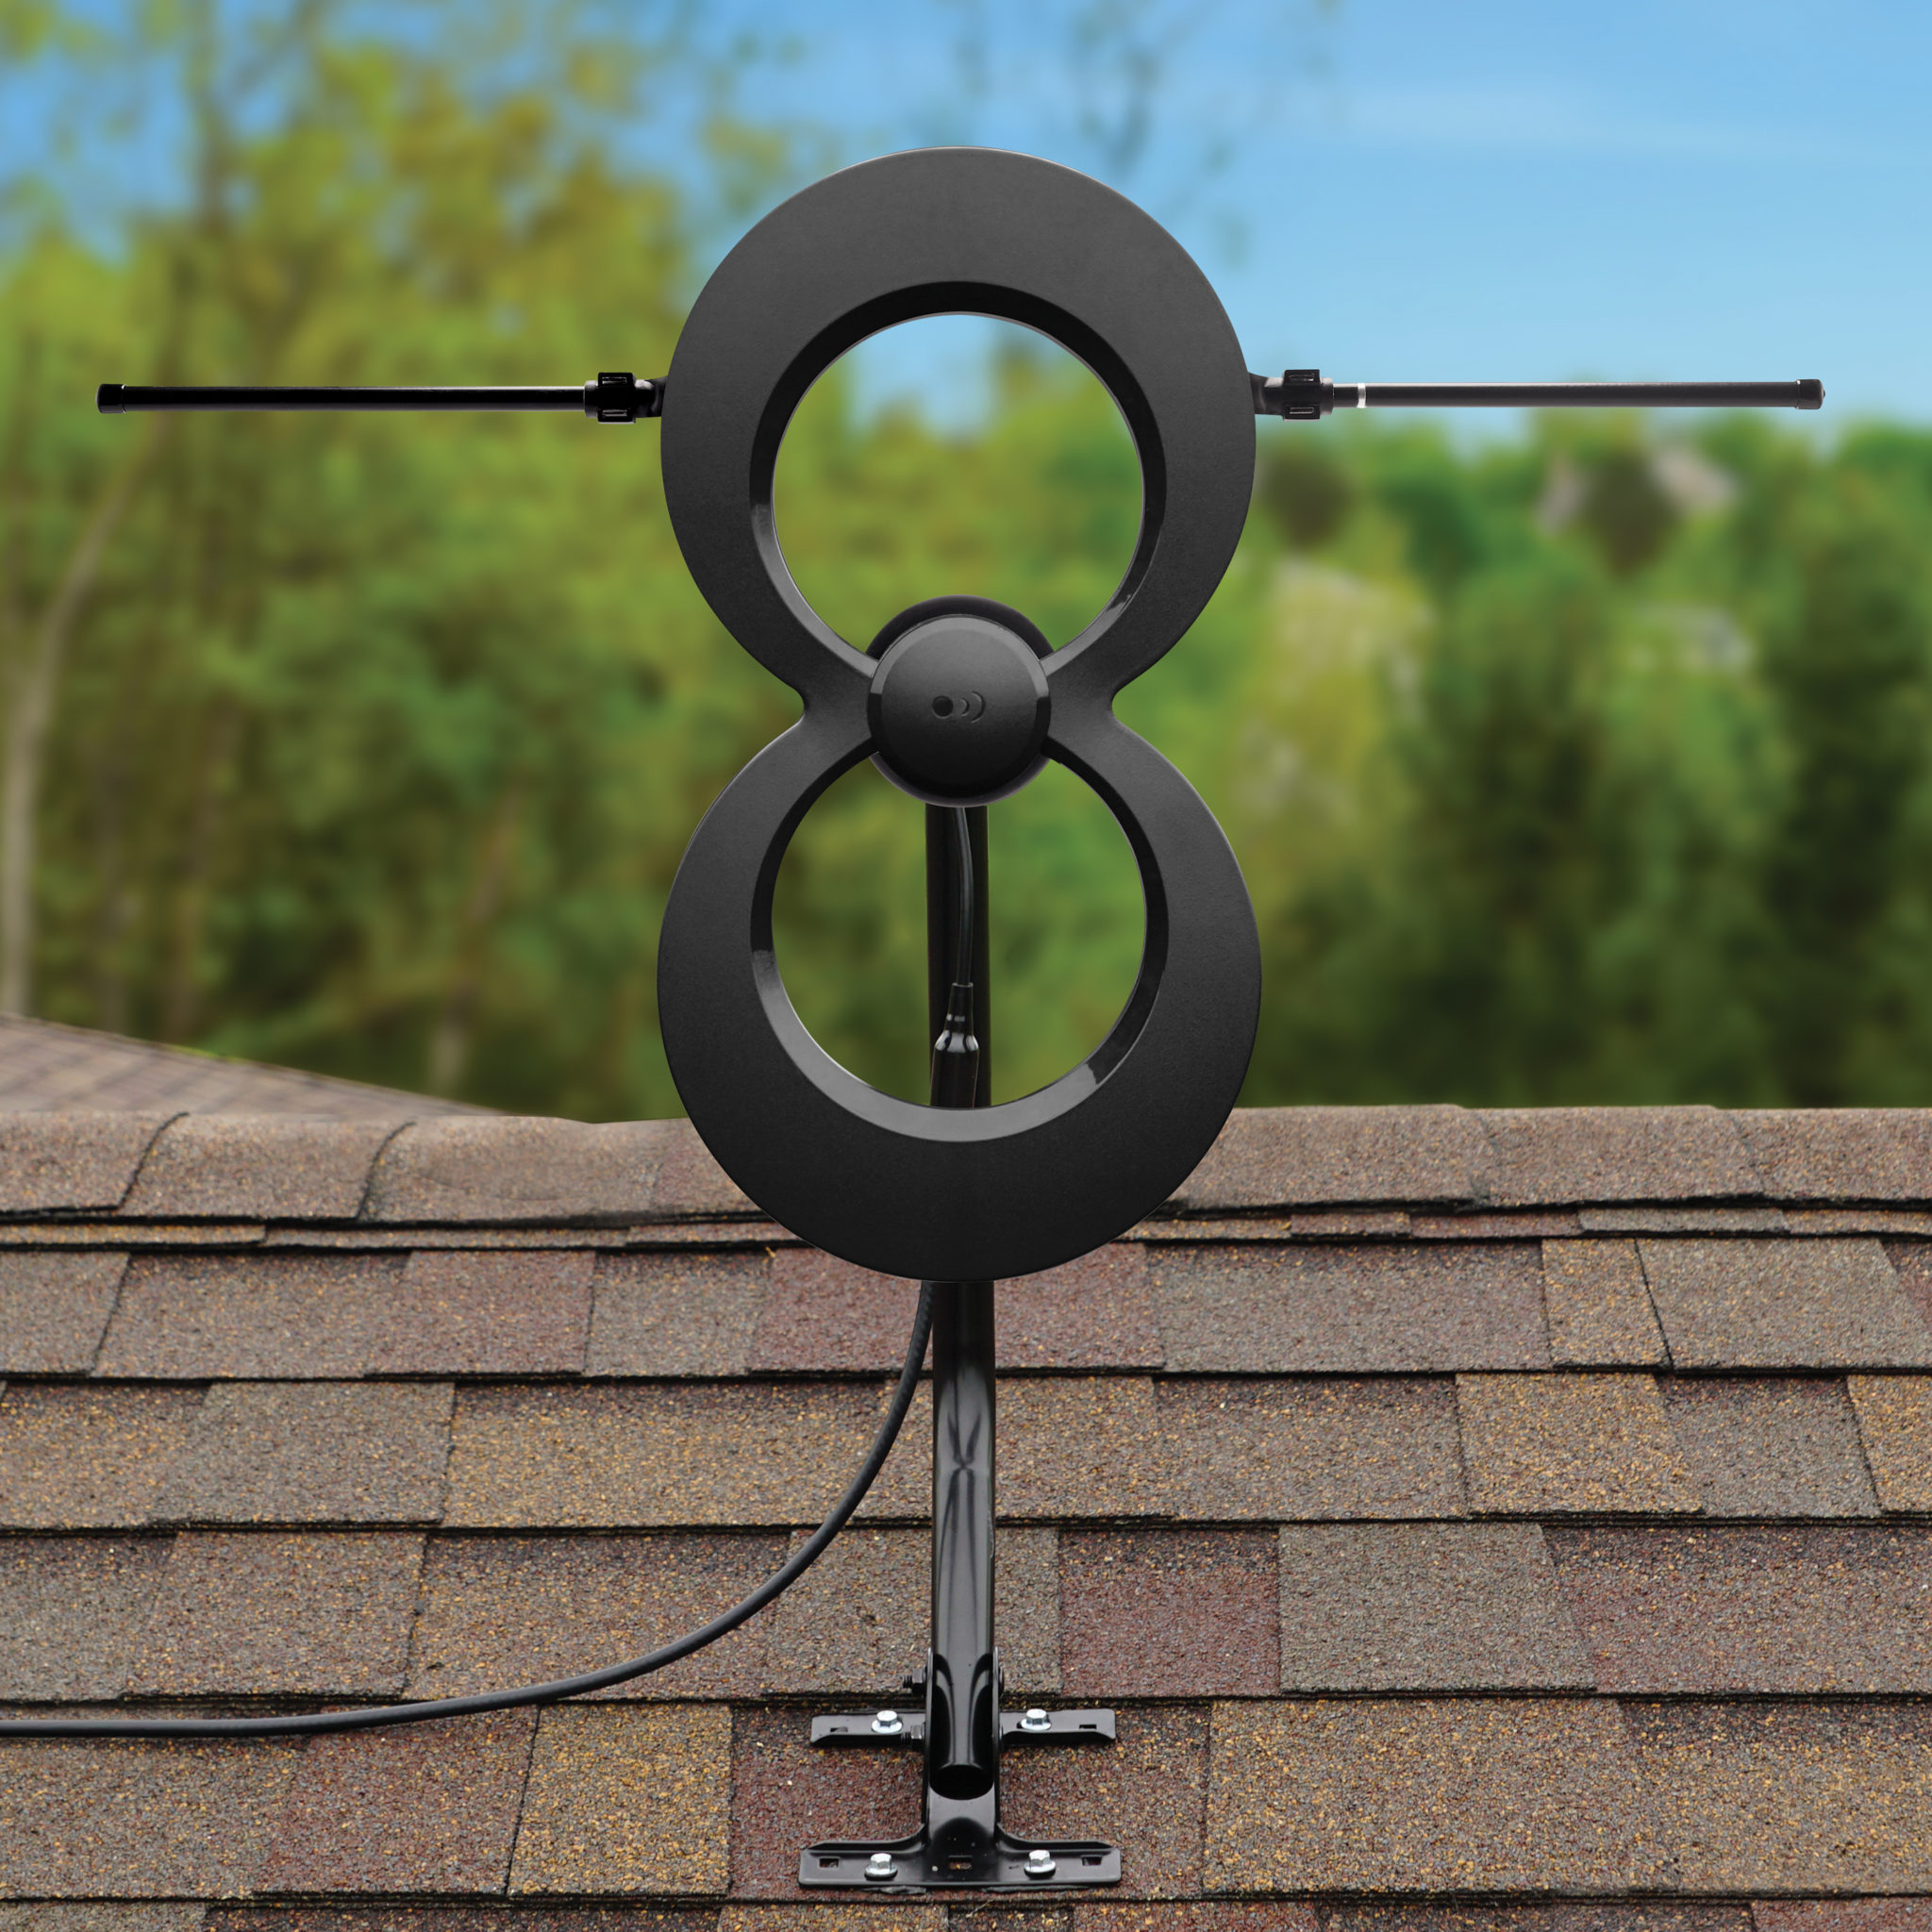 Antennas Direct ClearStream is CCN Readers’ Favorite Antenna Brand (Cordie Awards 2021)